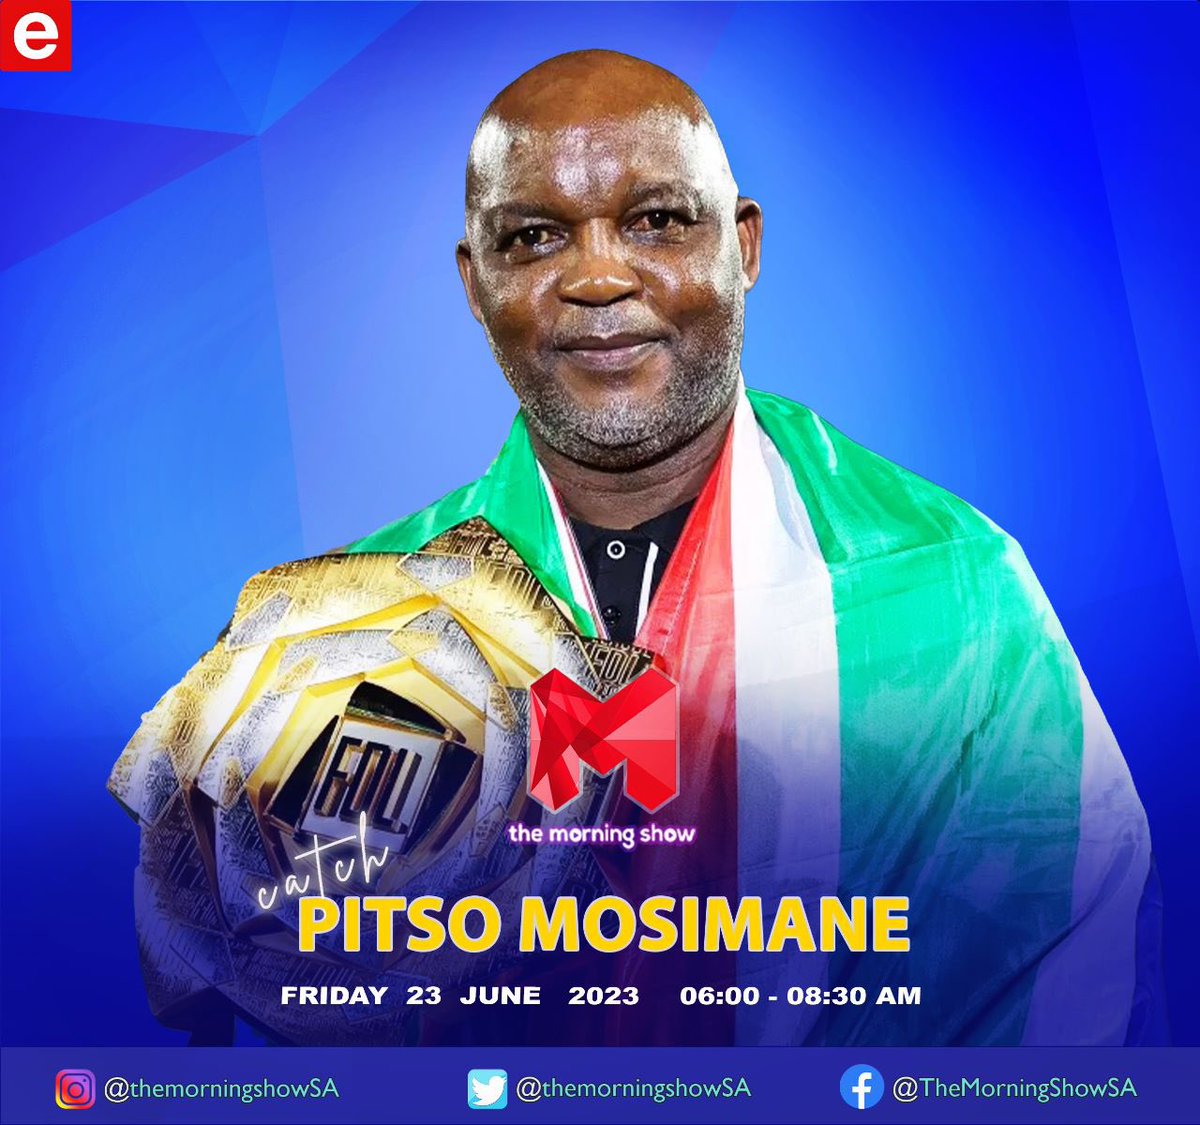 Catch Coach @TheRealPitso on @TheMorningShow tomorrow morning at 07:10! 🤩
@PMosimaneSS 
#ChangingTheGame #CreatingThePlayerofTomorrow